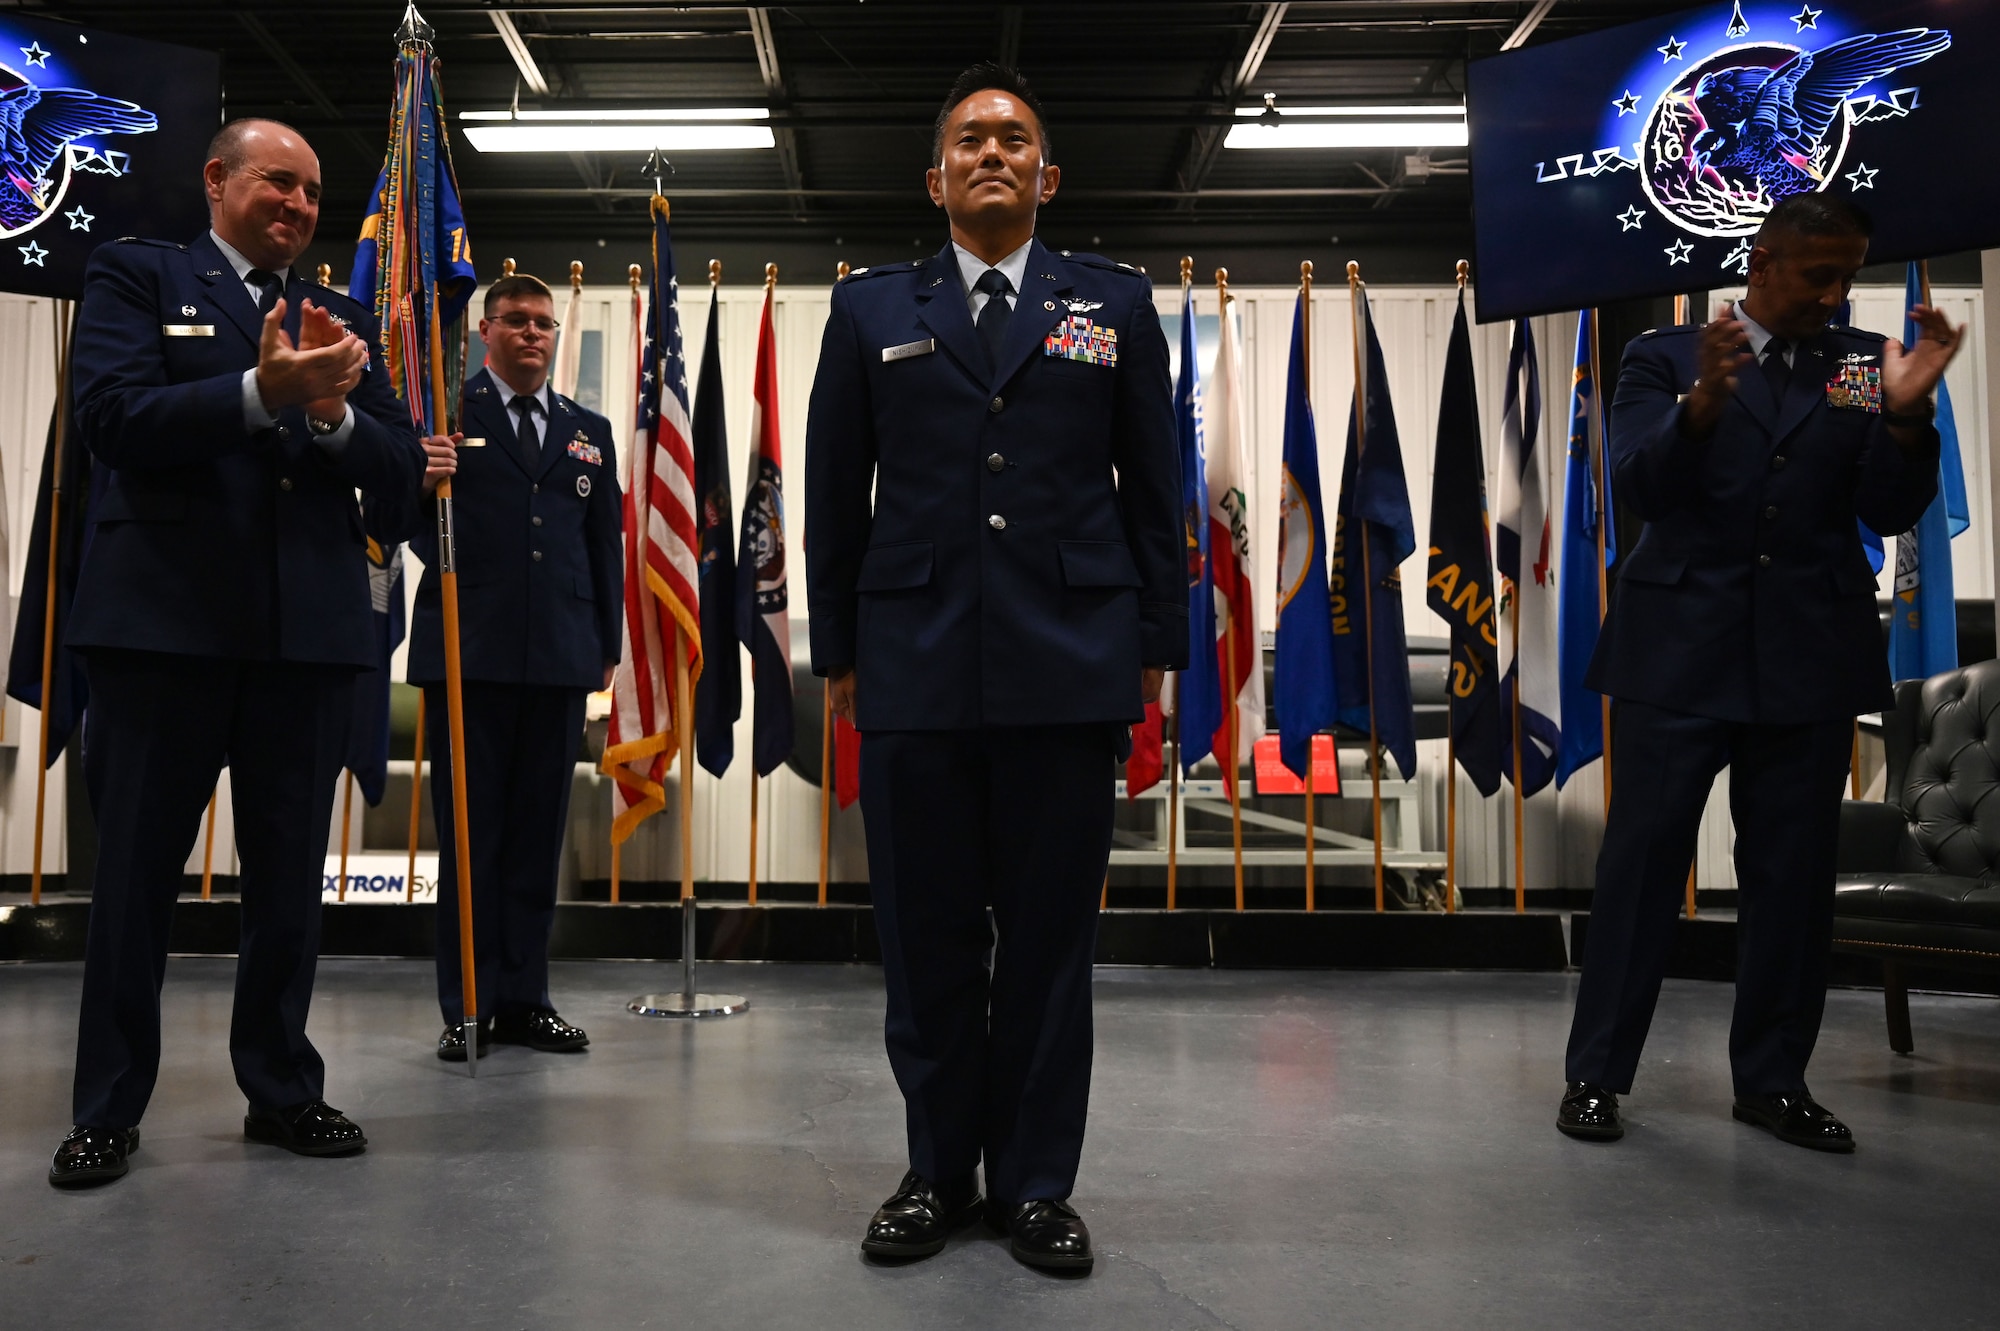 U.S. Air Force Col. Robert P. Cocke, 350th Spectrum Warfare Group commander, stands at attention as during a change of command at Eglin Air Force Base, June 6, 2023. The mission of the 16th EWS is to develop, test, validate, and field electromagnetic warfare capabilities for the warfighter. (U.S. Air Force photo by Staff Sgt. Ericka A. Woolever)